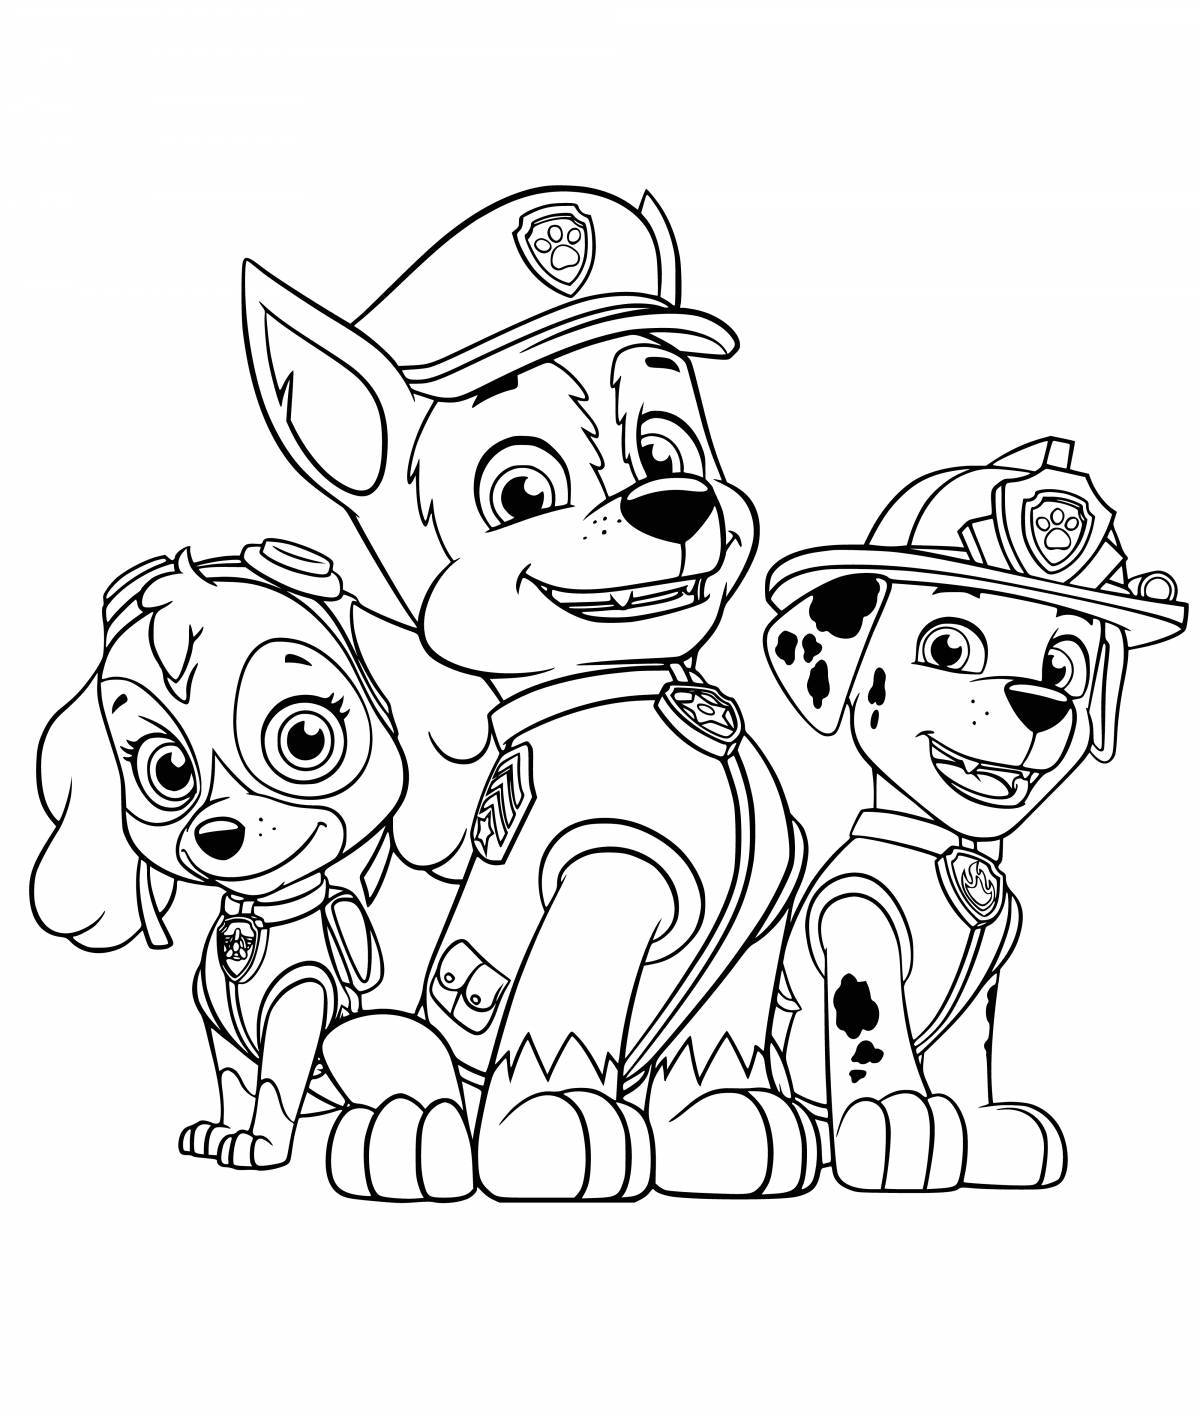 Color-frenzy coloring page paw patrol marshal